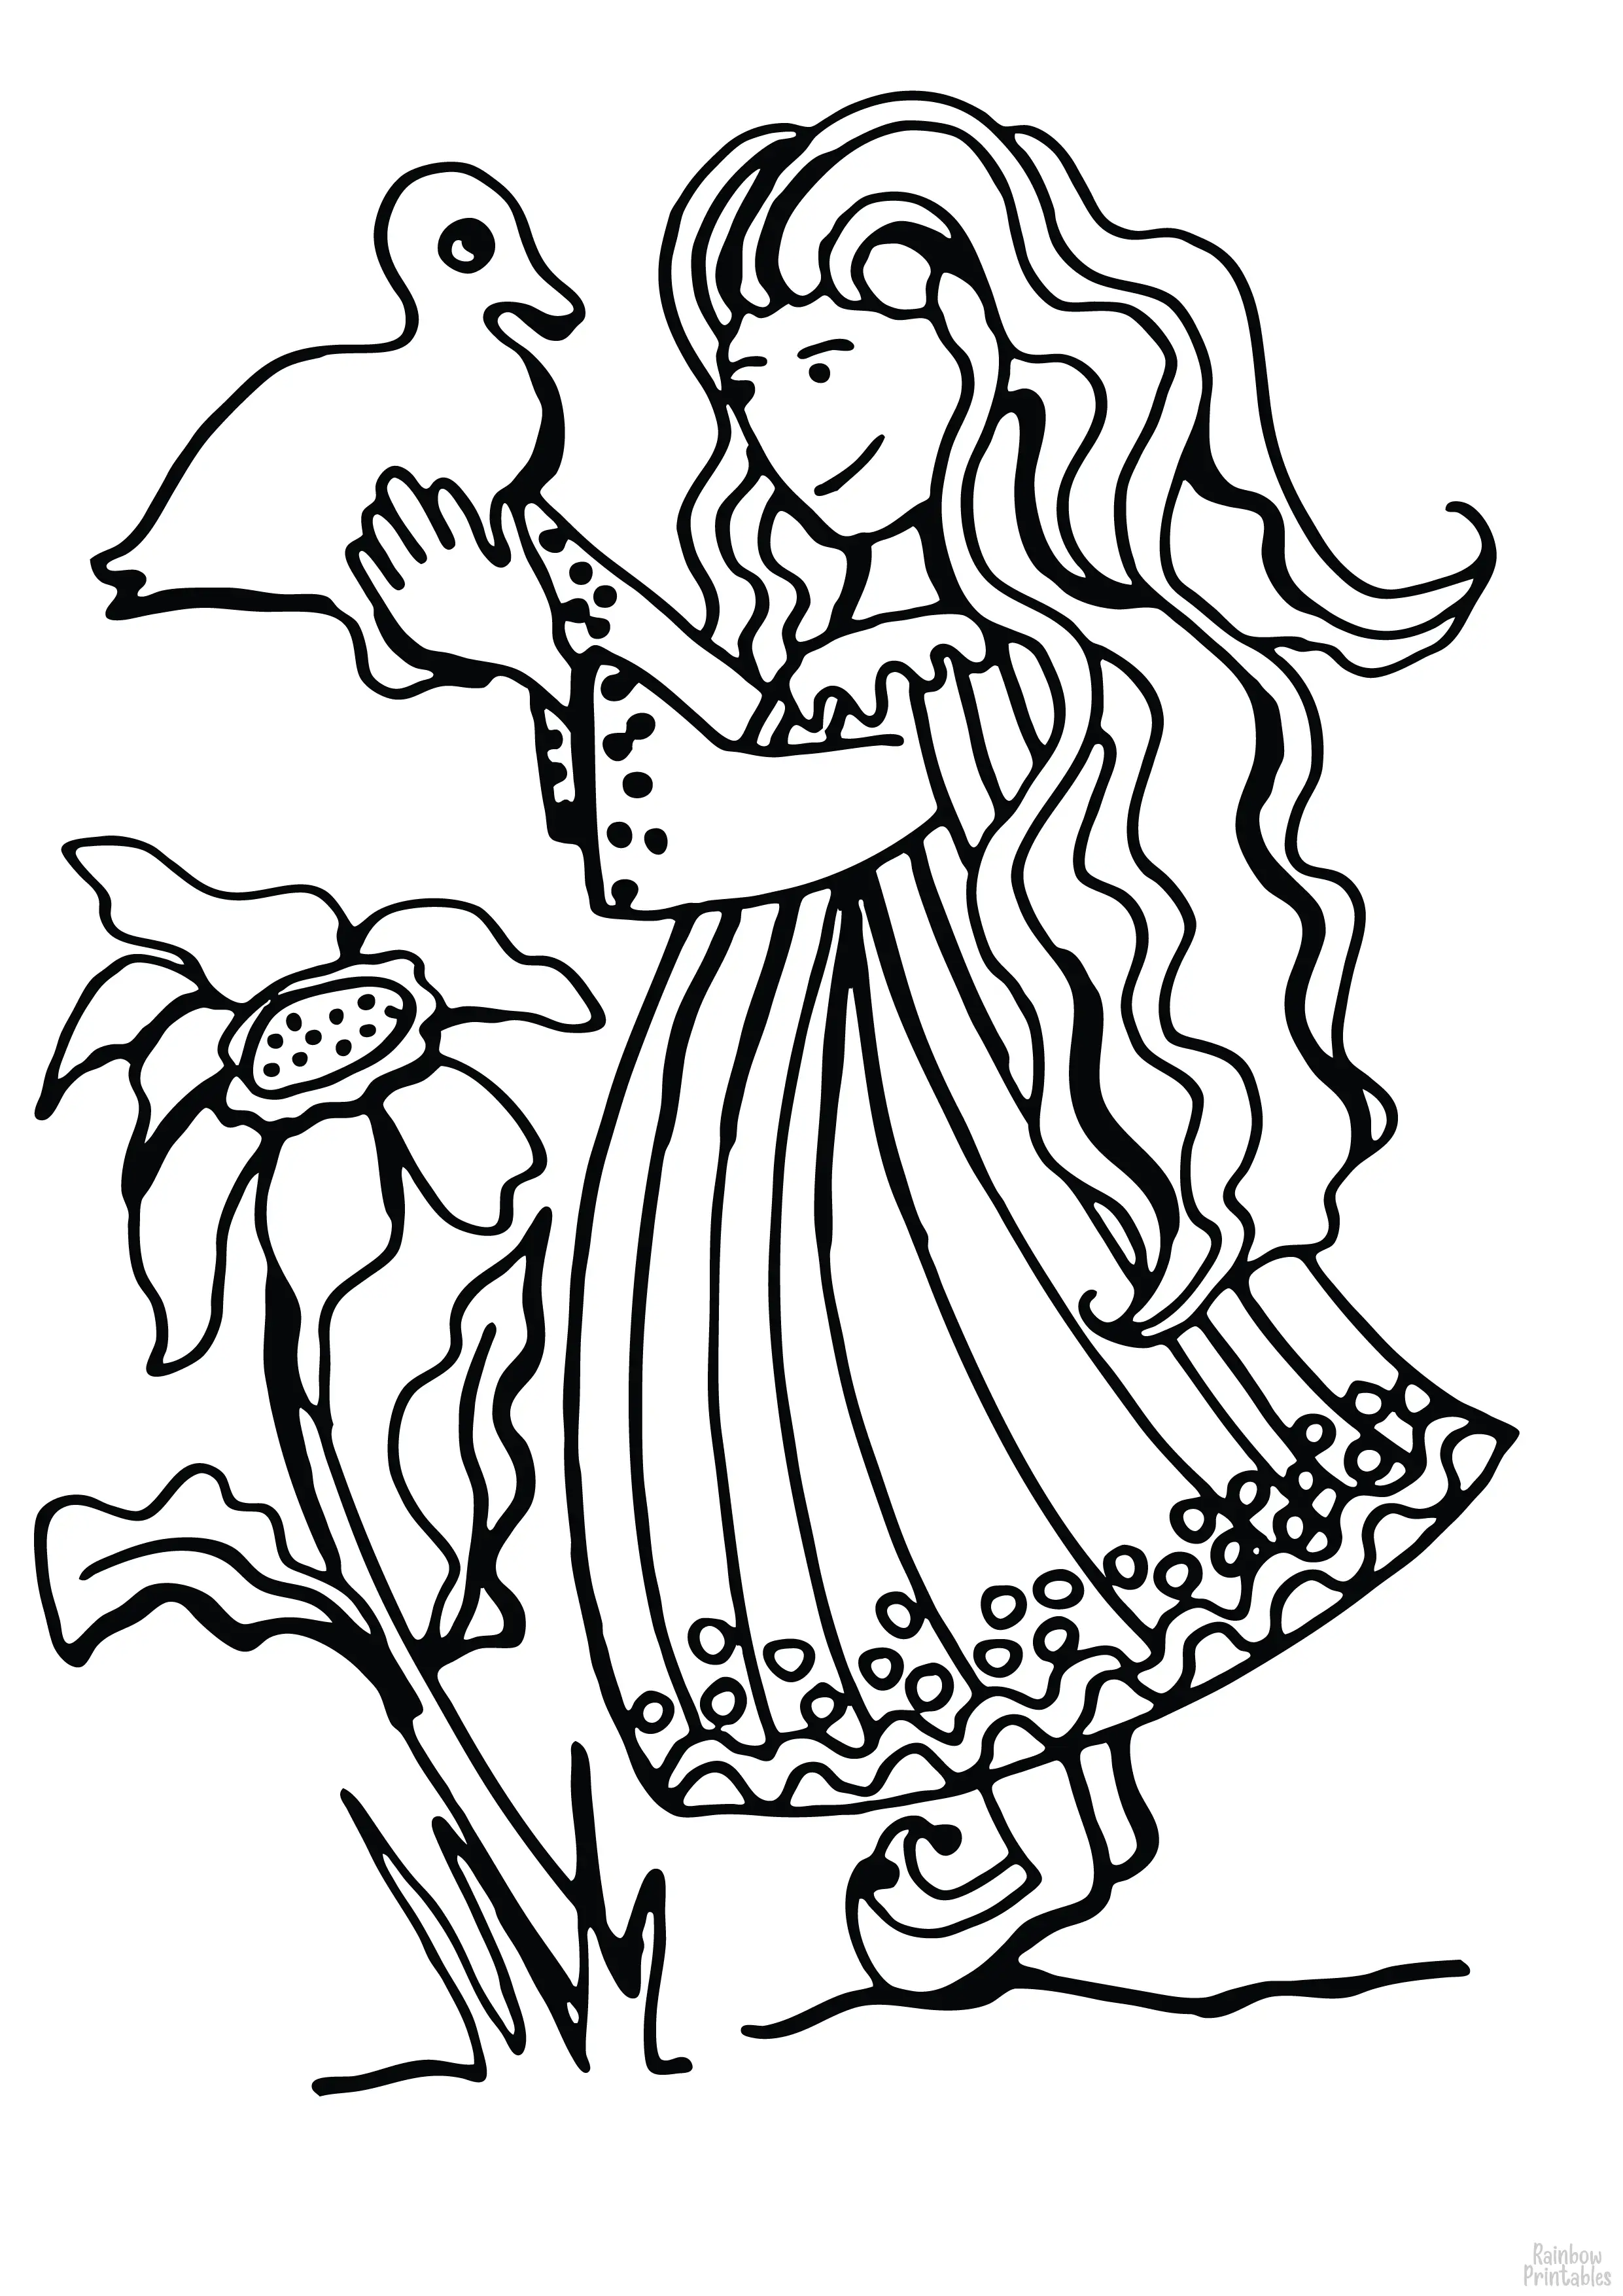 Cartoon Lady holding DUCK Flower Clipart Coloring Pages for Kids Art Activities Line Art